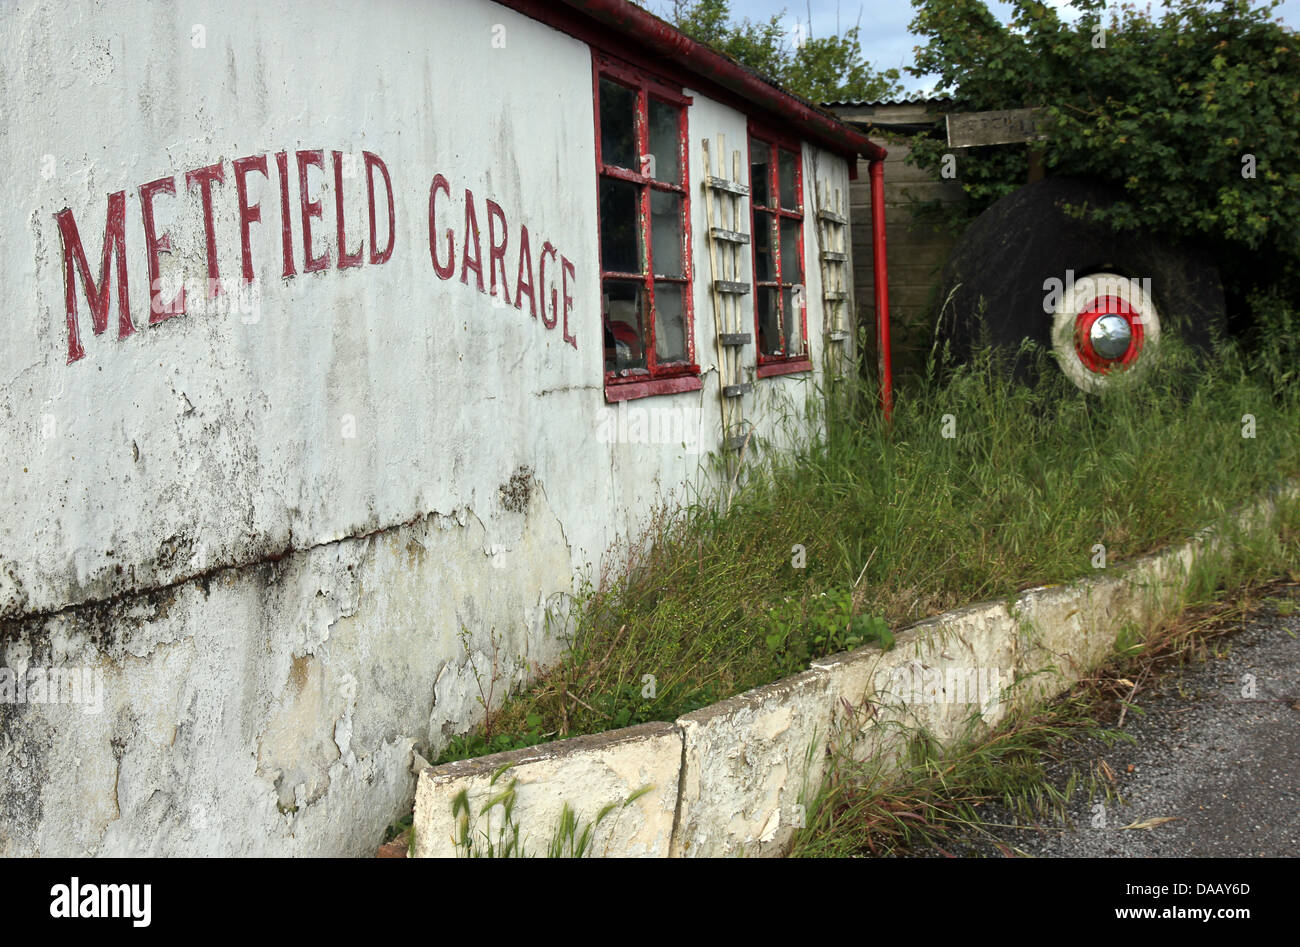 Metfield garage in Suffolk England, a disused rural petrol station and garage at the edge of a World War Two airfield. Stock Photo